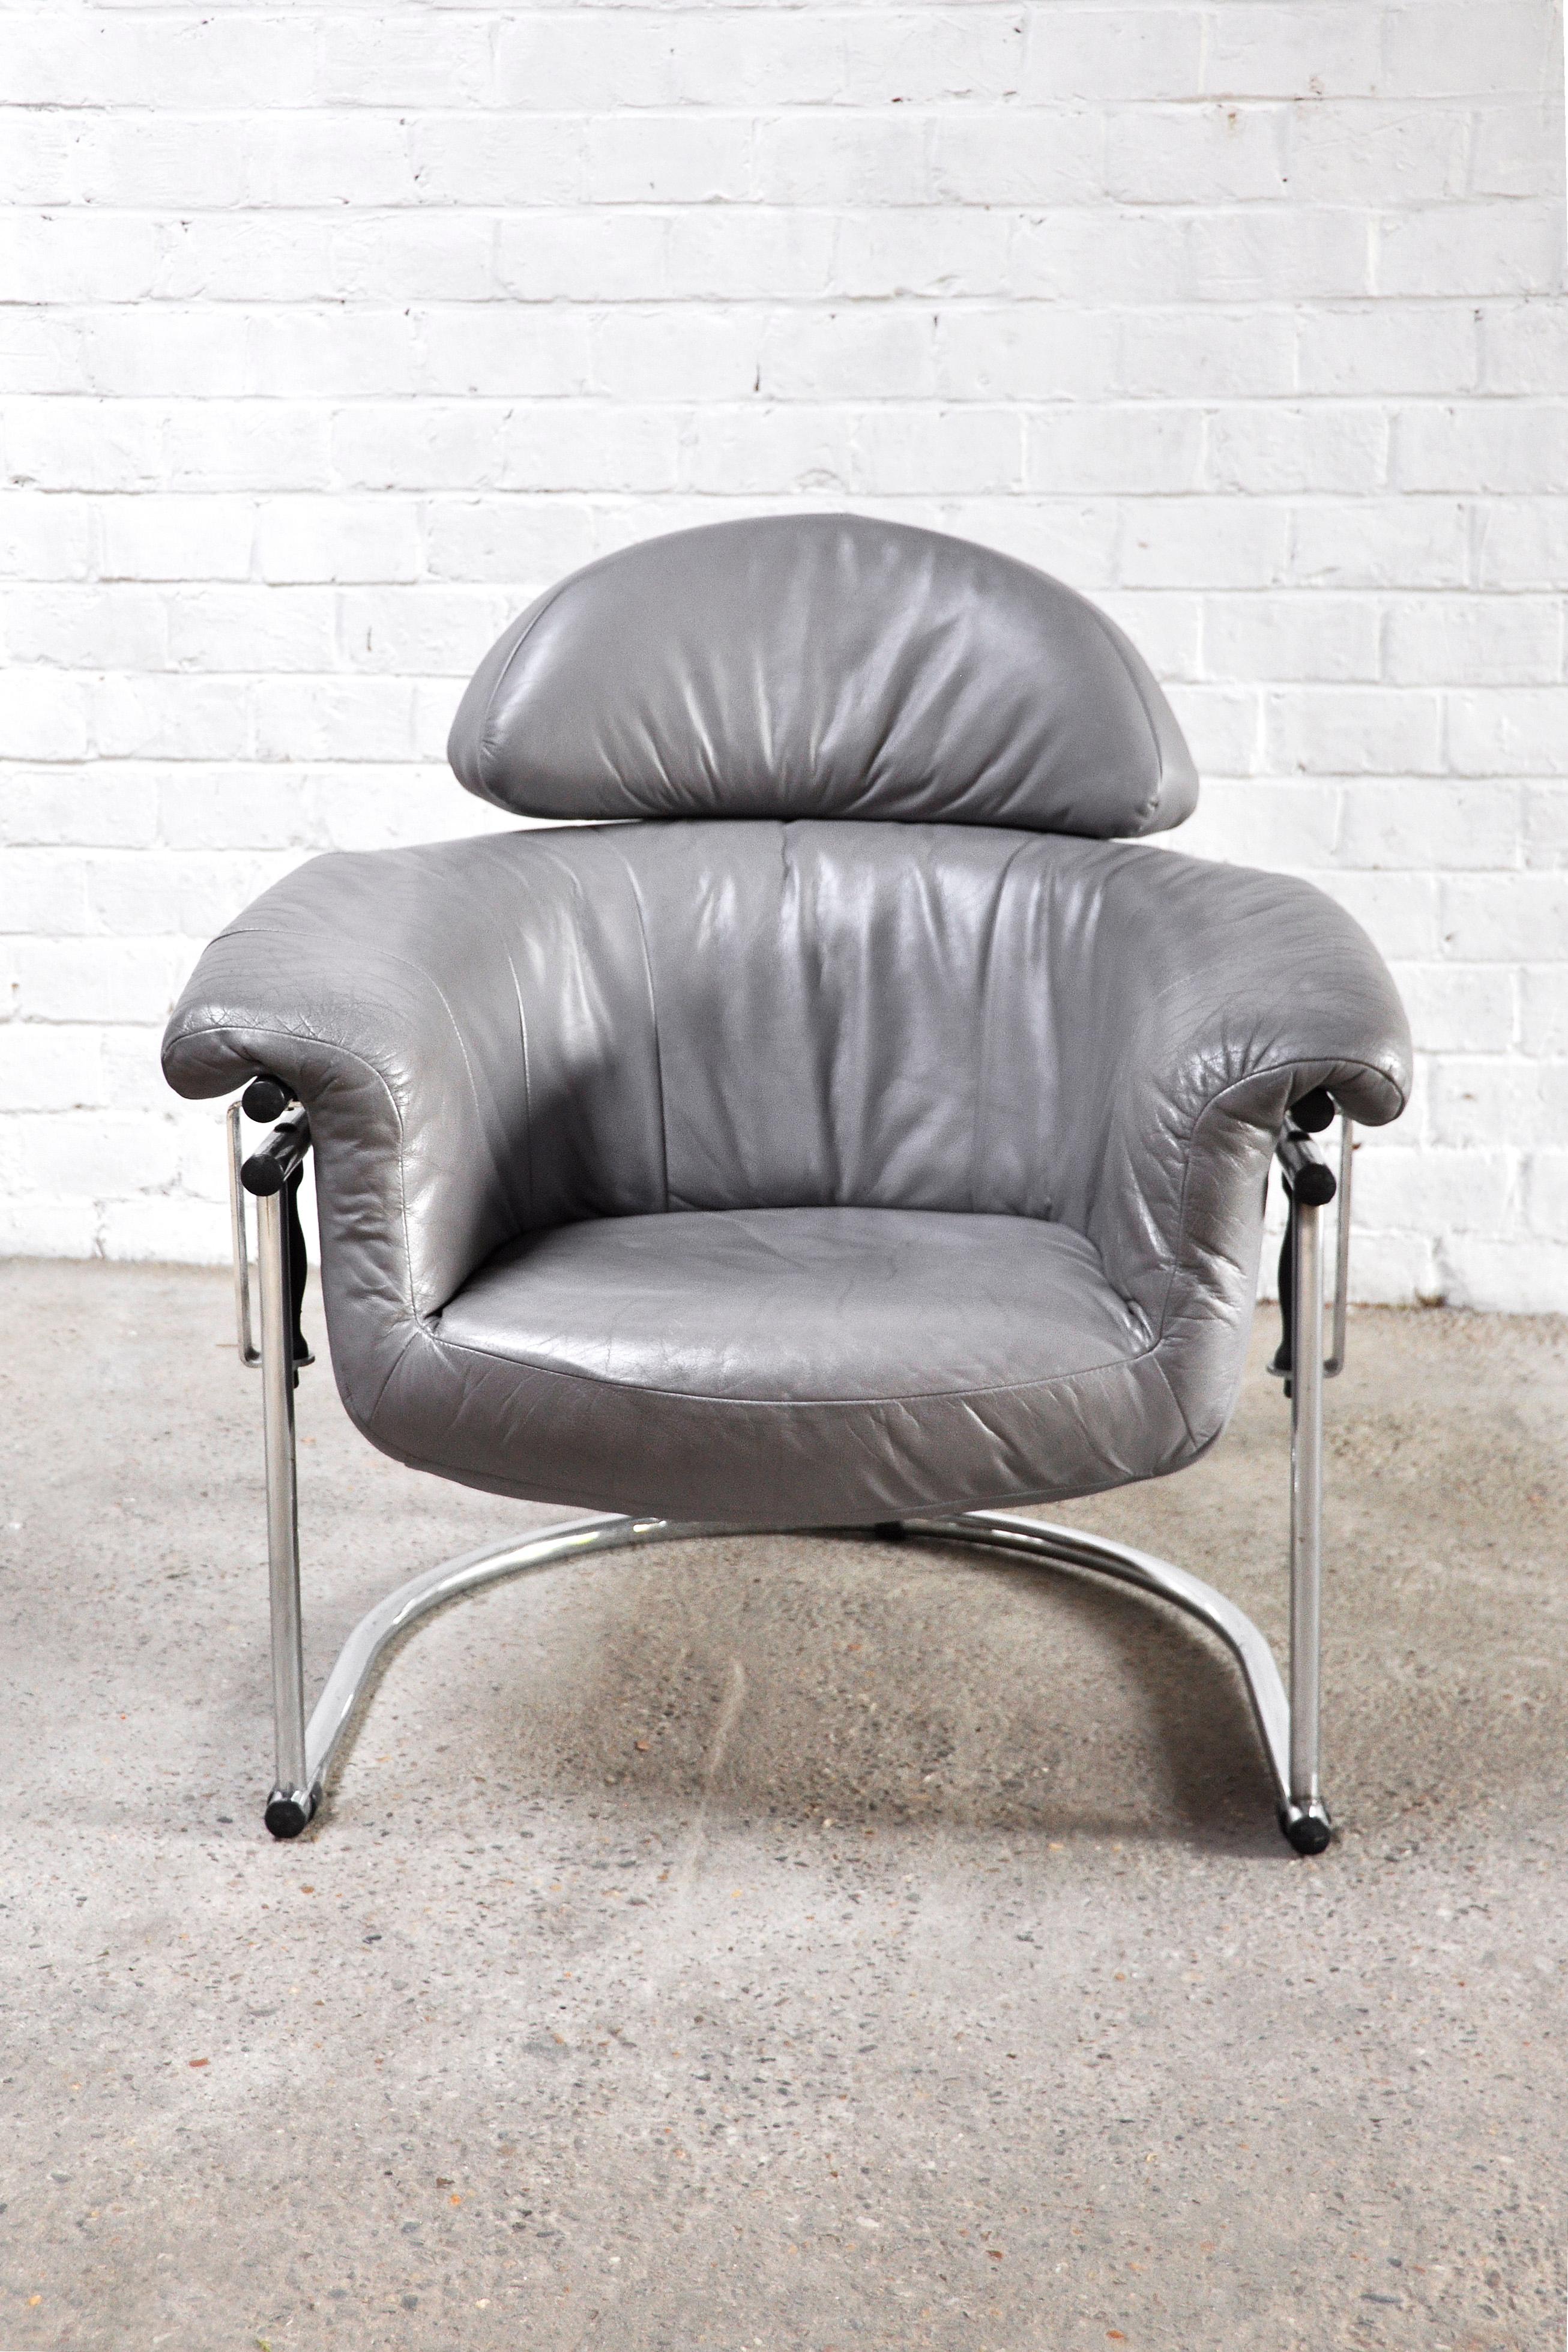 Rare and never before seen lounge chair out of the 1980’s. This chair is built with very heavy quality materials and has the ability to slightly swivel. The tubular chromed frame carries the leather seat in a unique design with hanging rubber bobbin